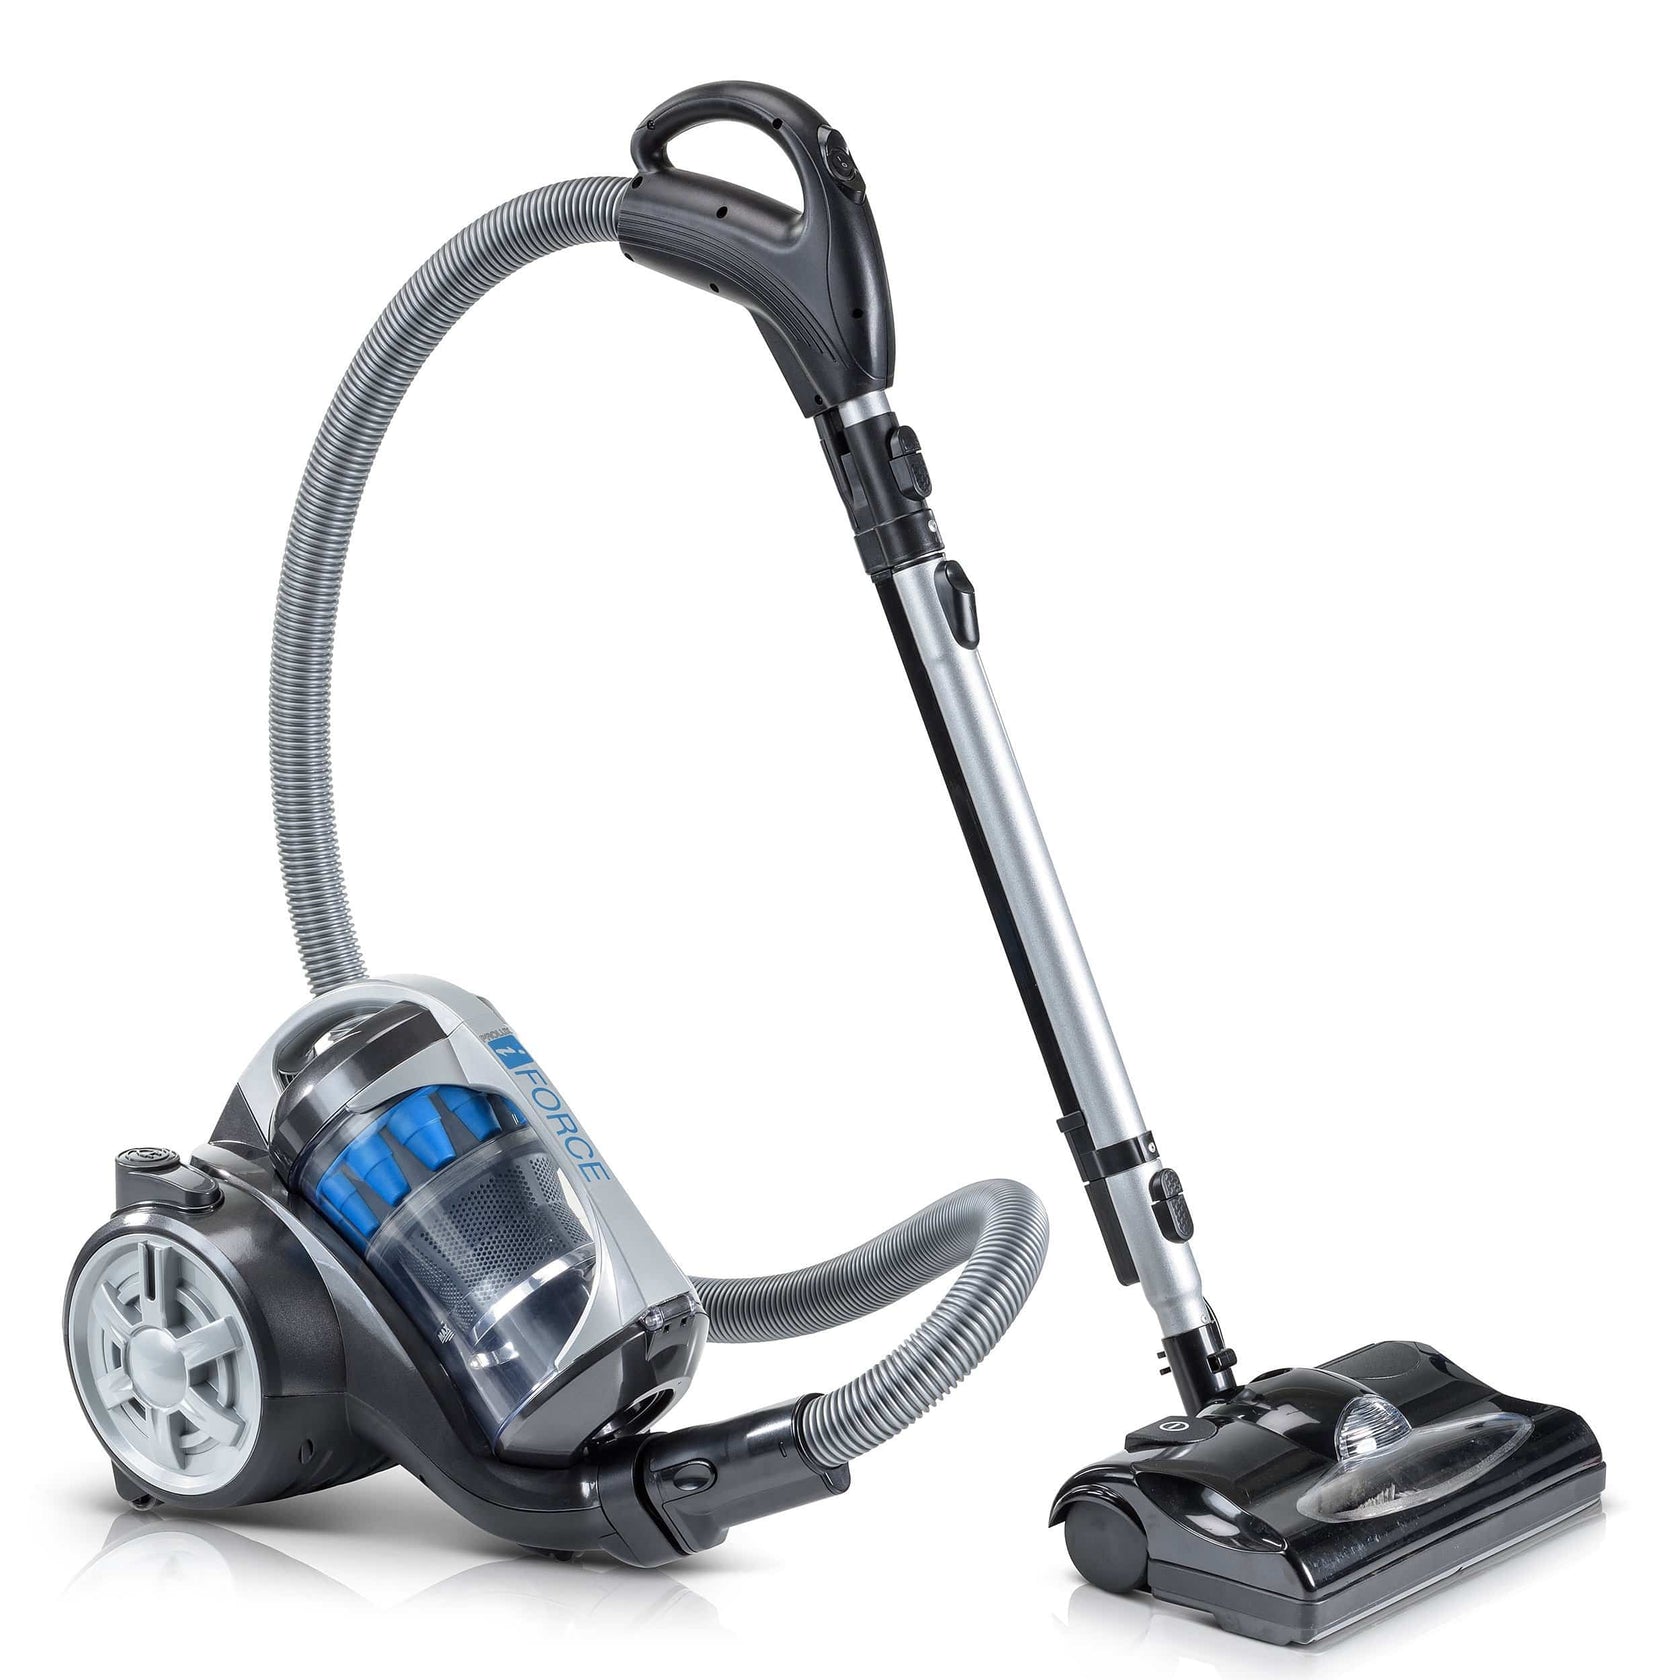 Prolux iFORCE Bagless Canister Vacuum Cleaner With 2 Stage Hepa Filtra